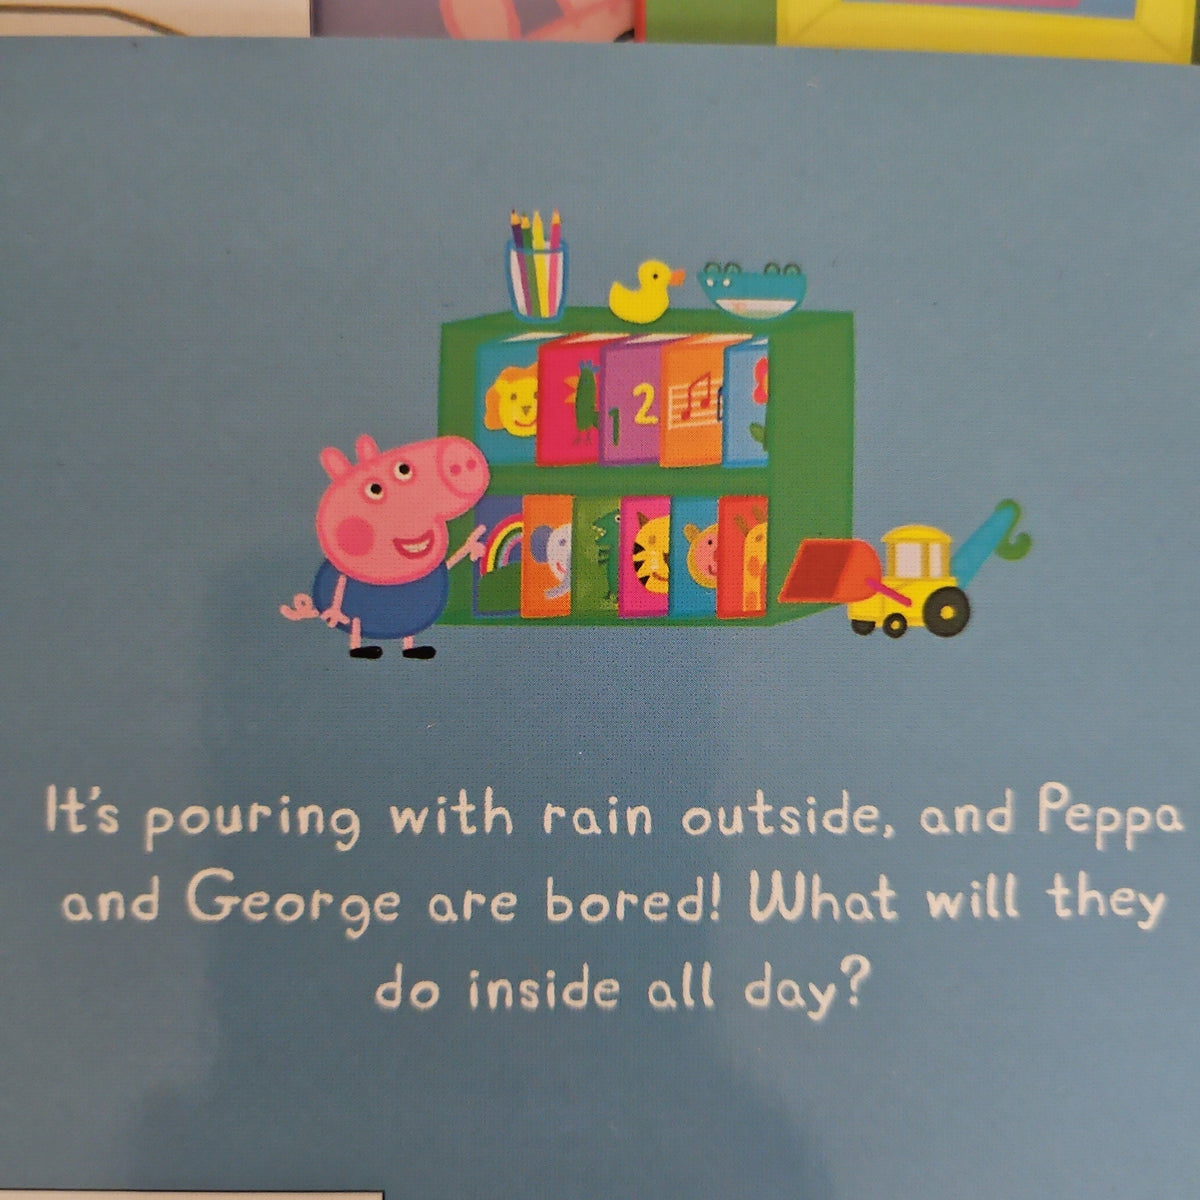 The Amazing Peppa Pig Collection:The Rainy Day